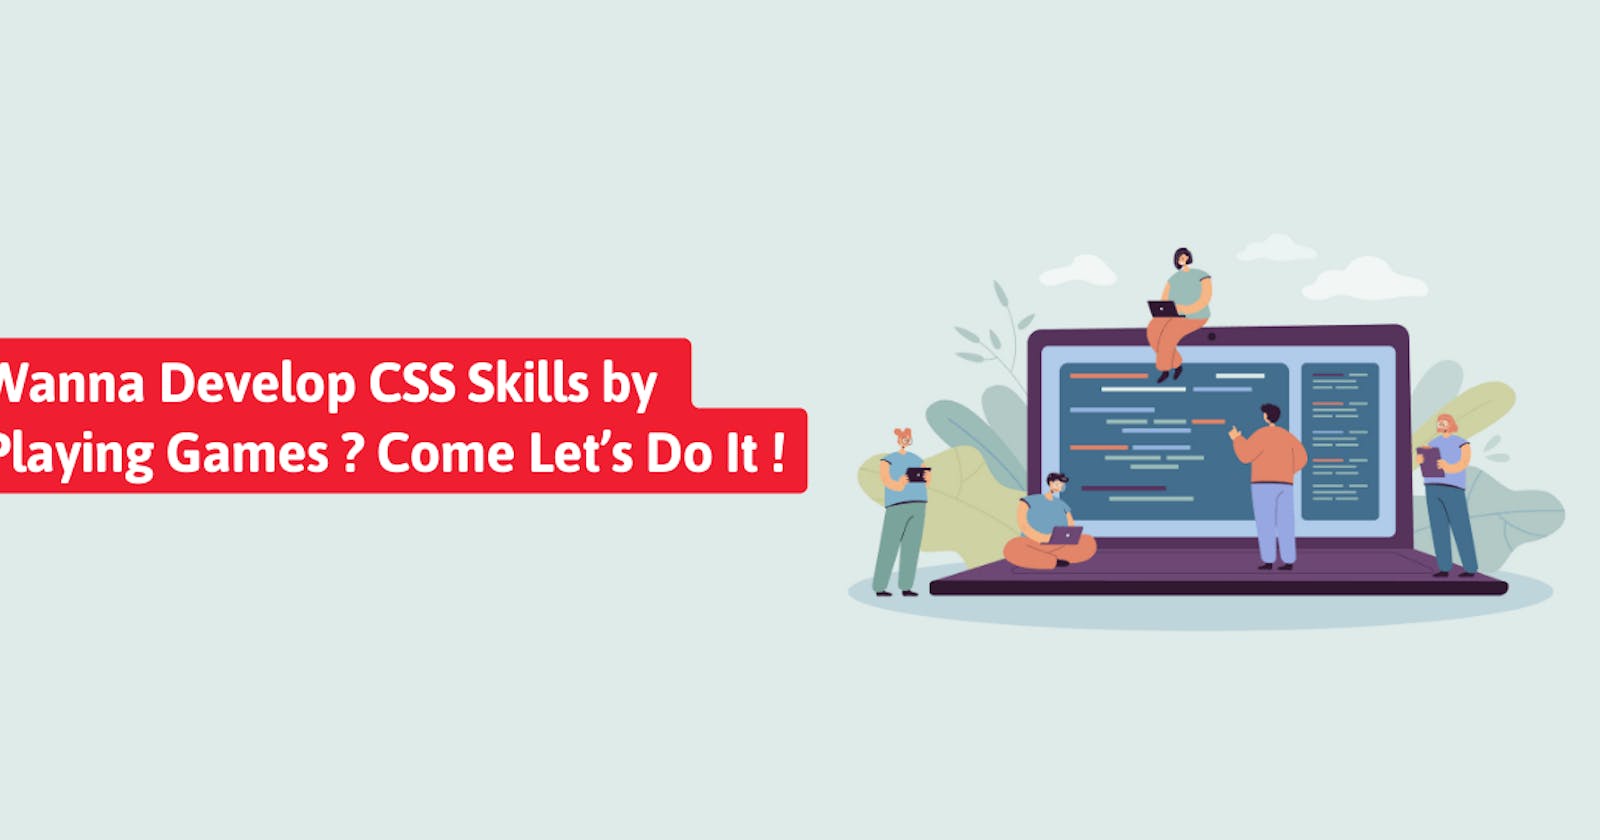 Do You Want to Develop CSS Skills by Playing Games?